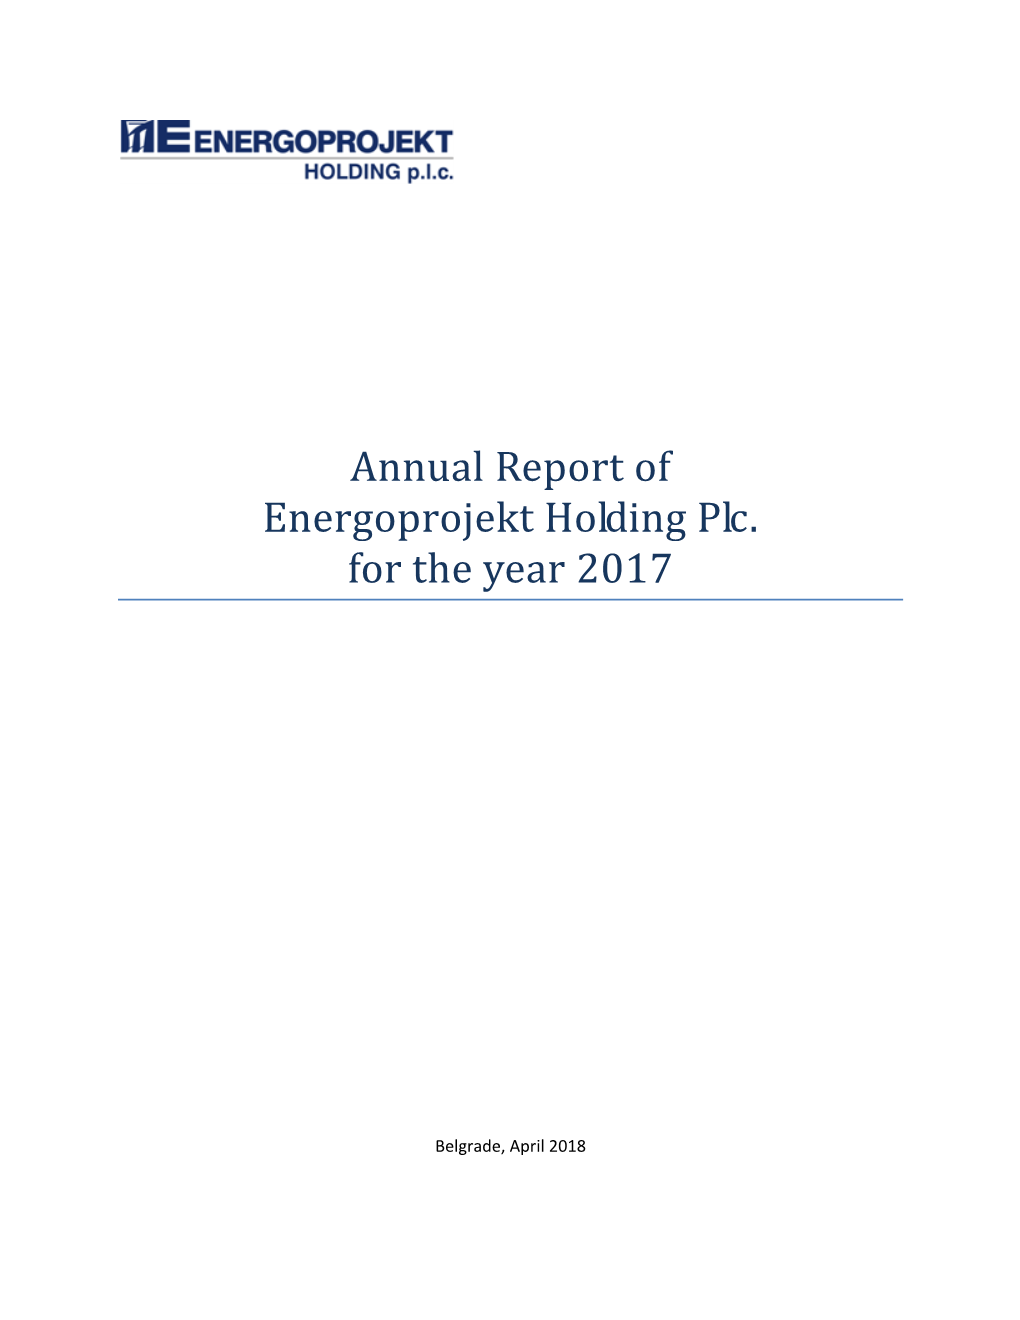 Annual Report of Energoprojekt Holding Plc. for the Year 2017